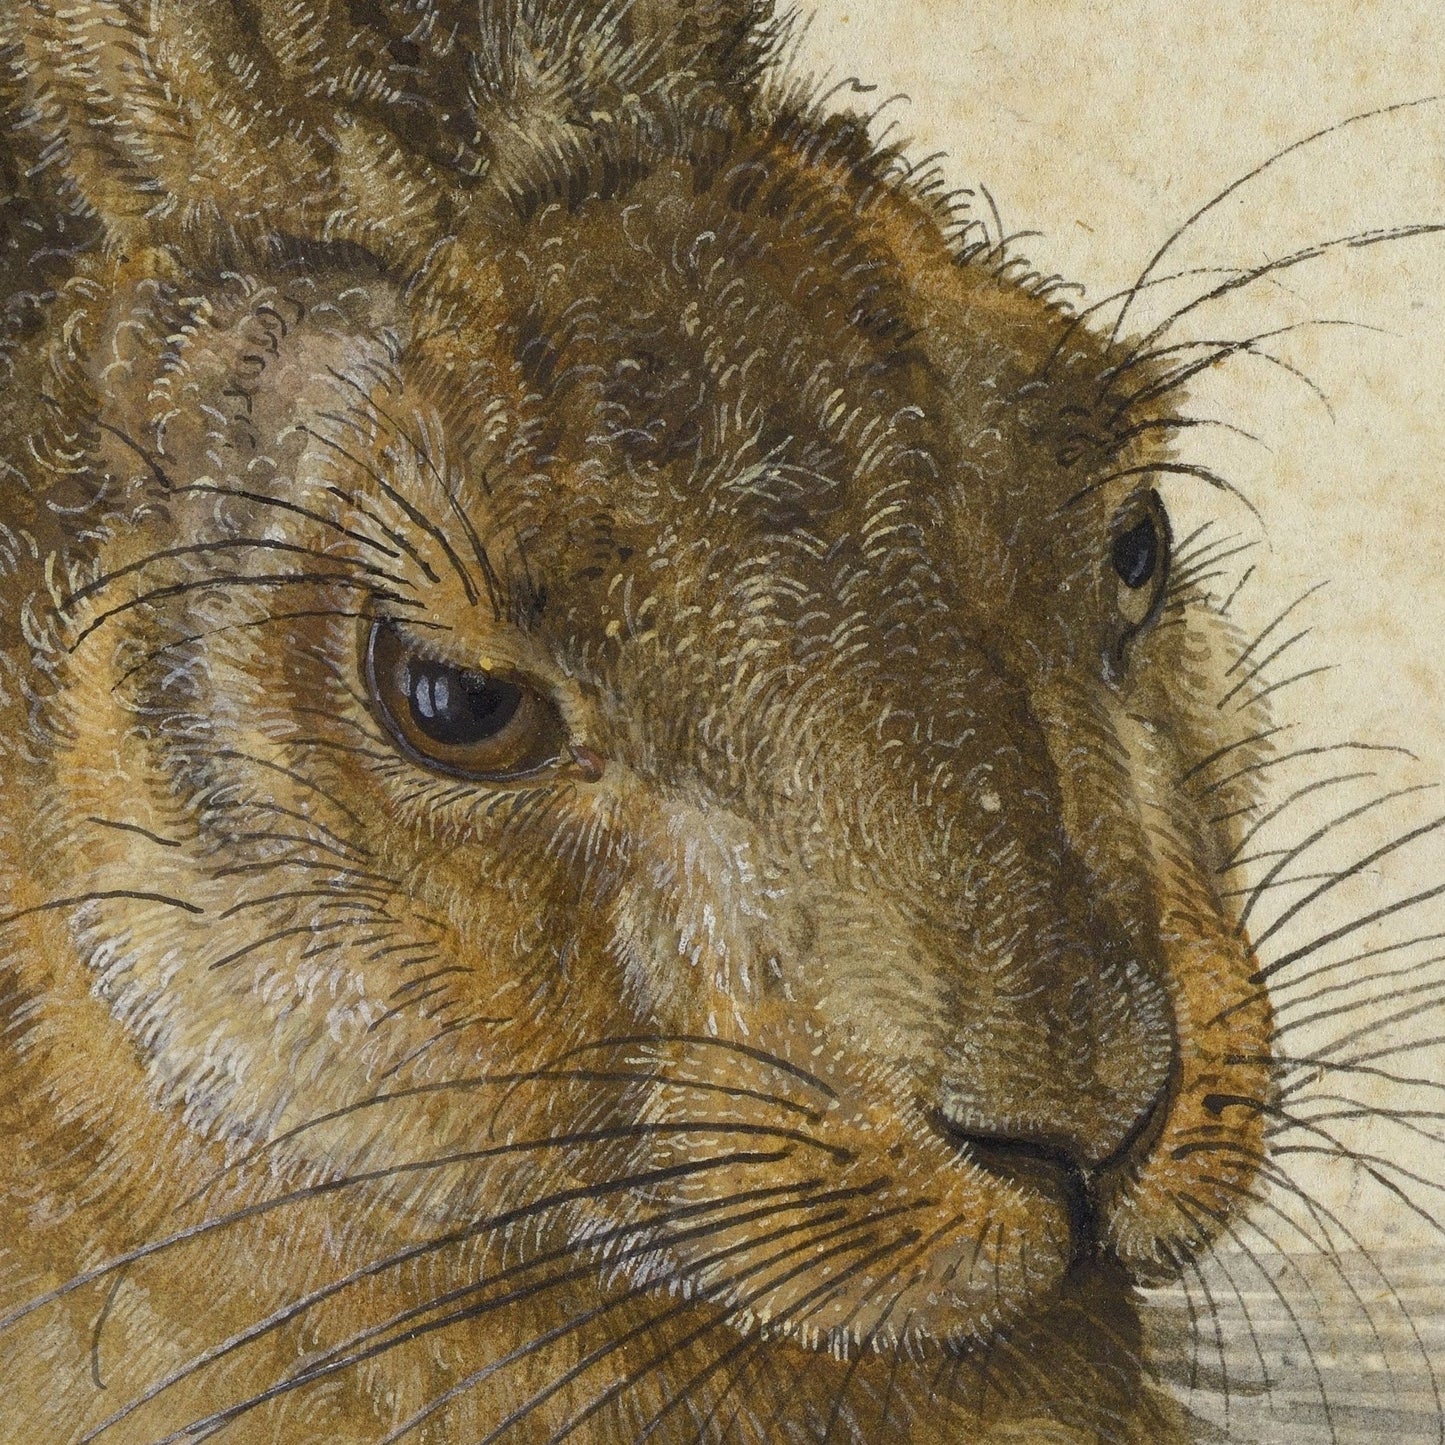 Young Hare by Albrecht Dürer, 3d Printed with texture and brush strokes looks like original oil-painting, code:003